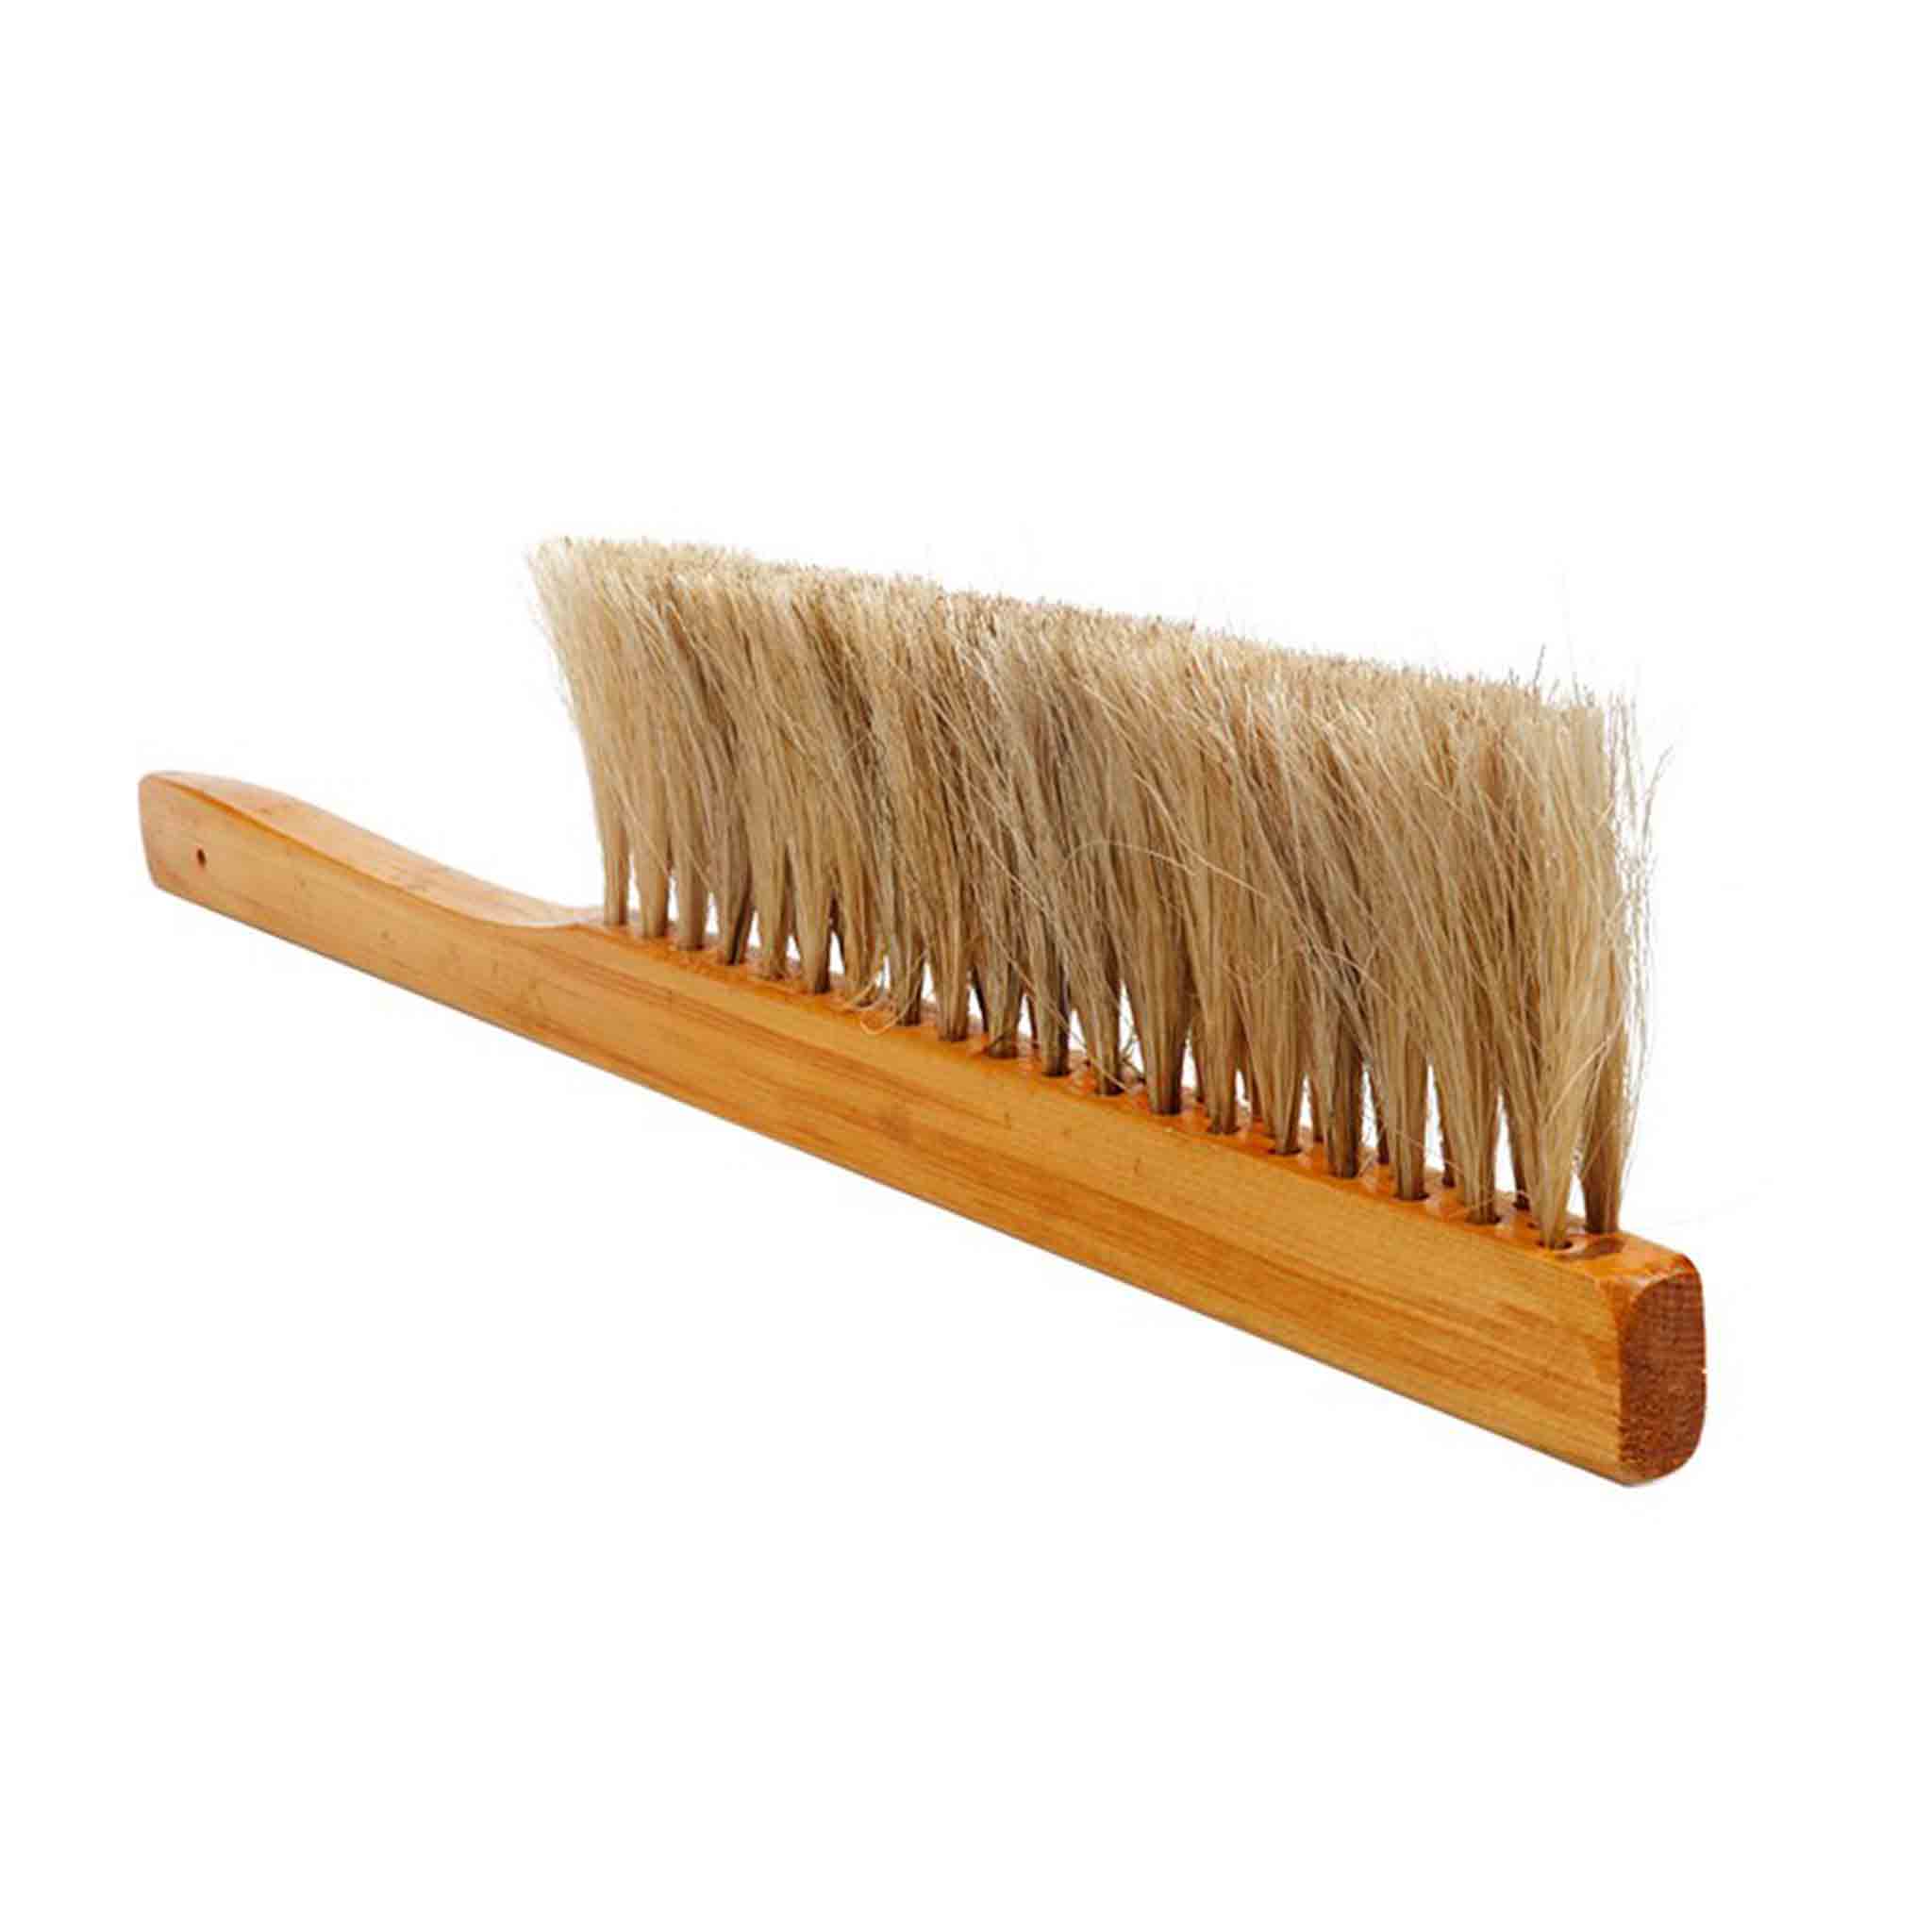 Bee Brush with Triple Bristle and Straight Wooden Handle - Tools collection by Buzzbee Beekeeping Supplies